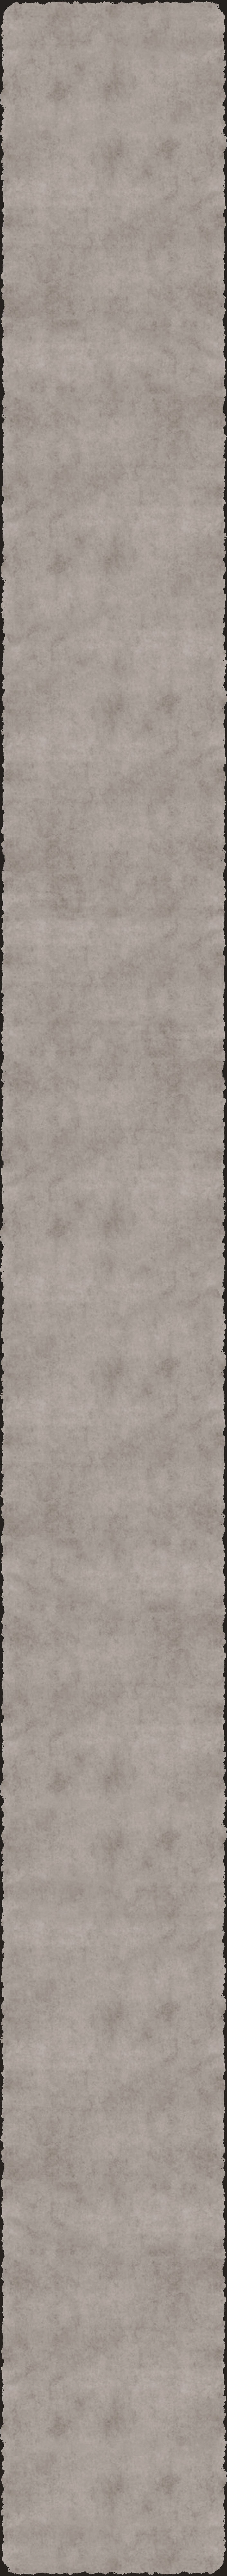 Parchment Background Image for My Projects: Screenshots, Page 5 on FlightToAtlantis.net